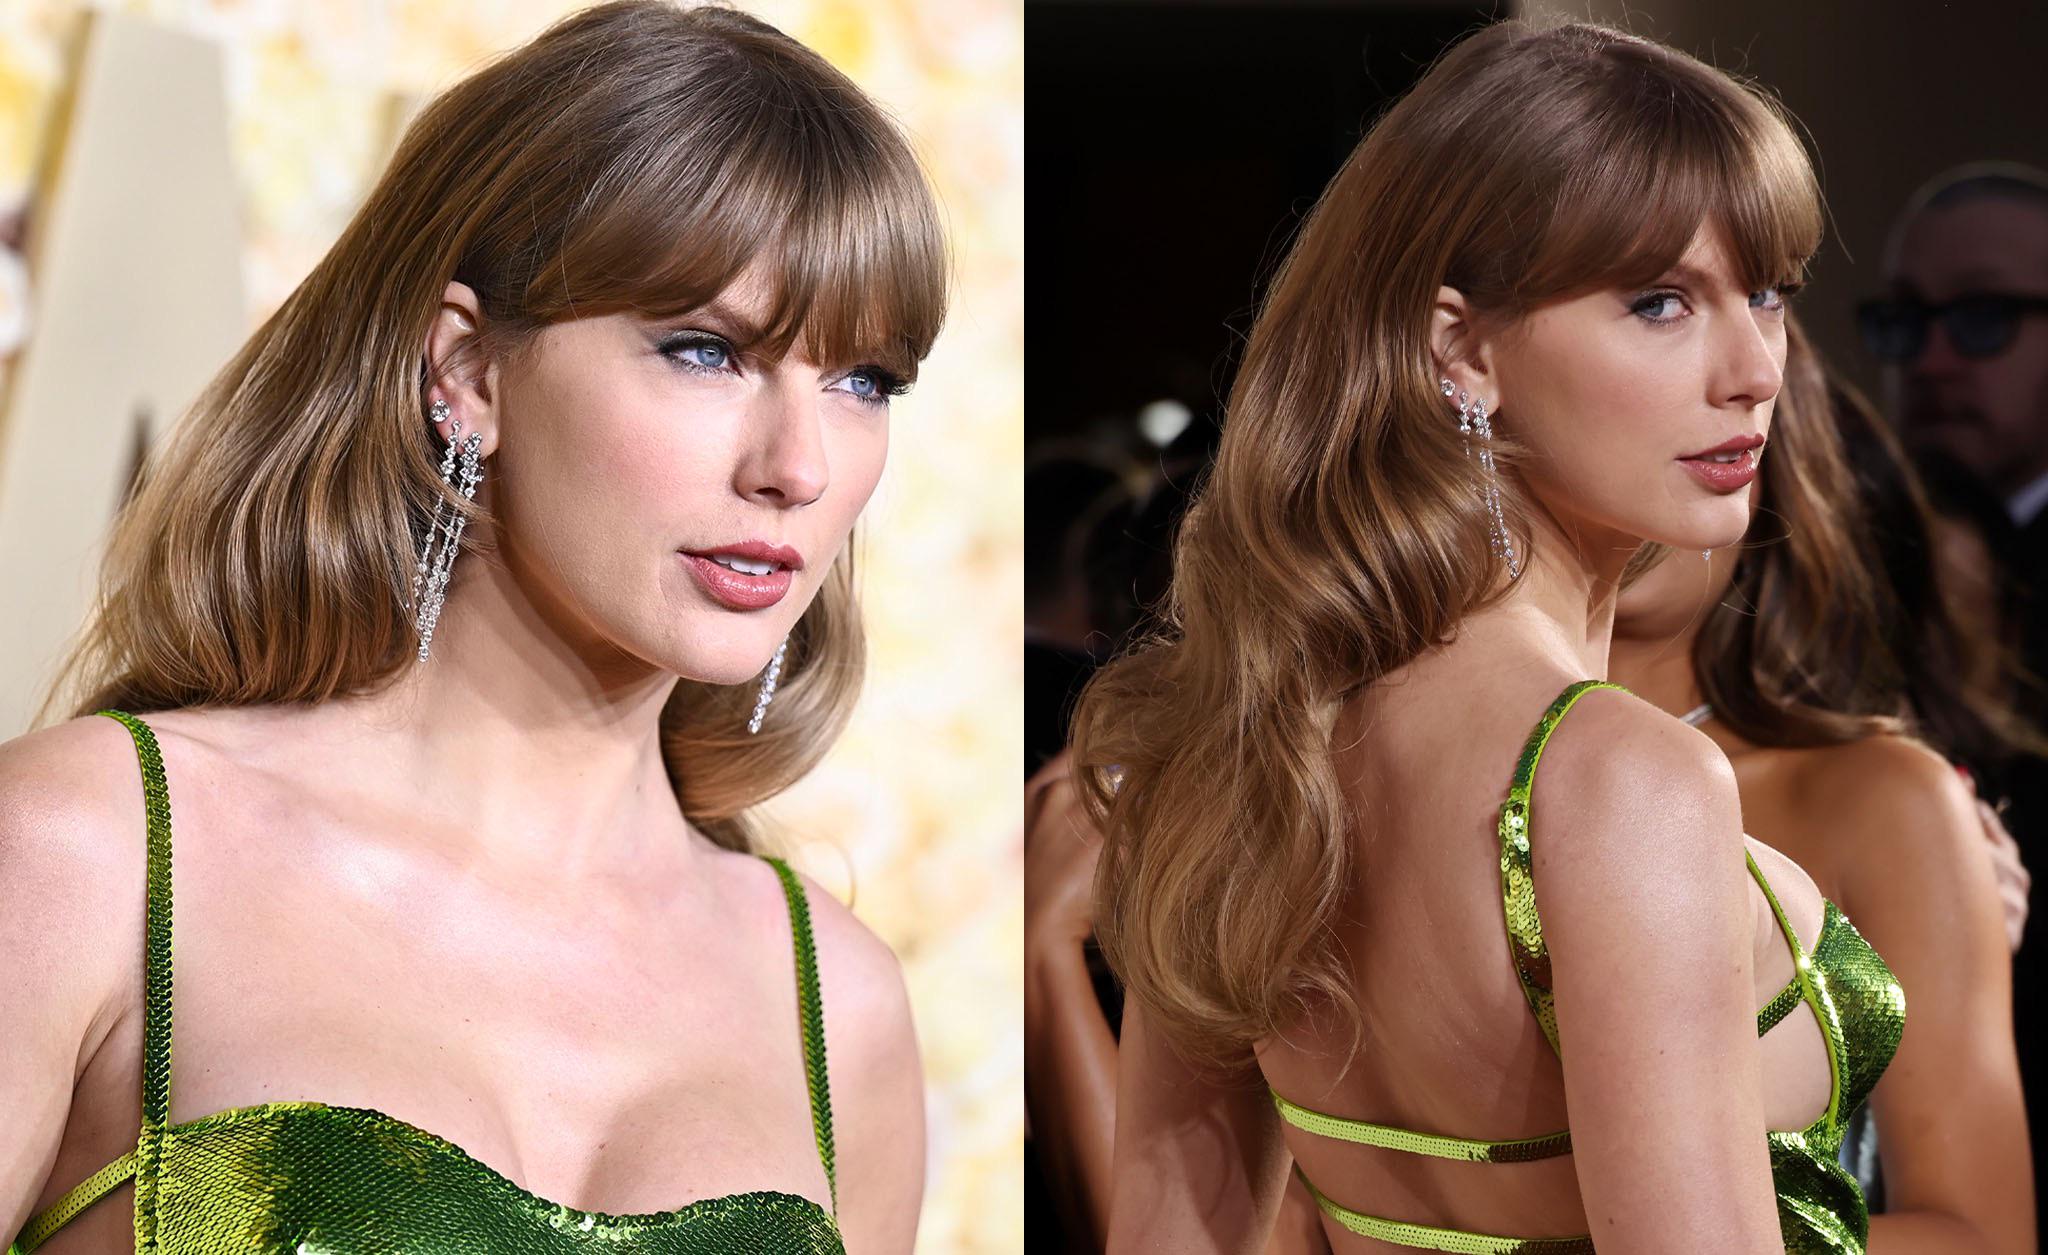 How Taylor Swift transformed her hair with extensions, balayage and treatments after years of straightening and bleaching damaged natural curls according to celebrity hairdressers